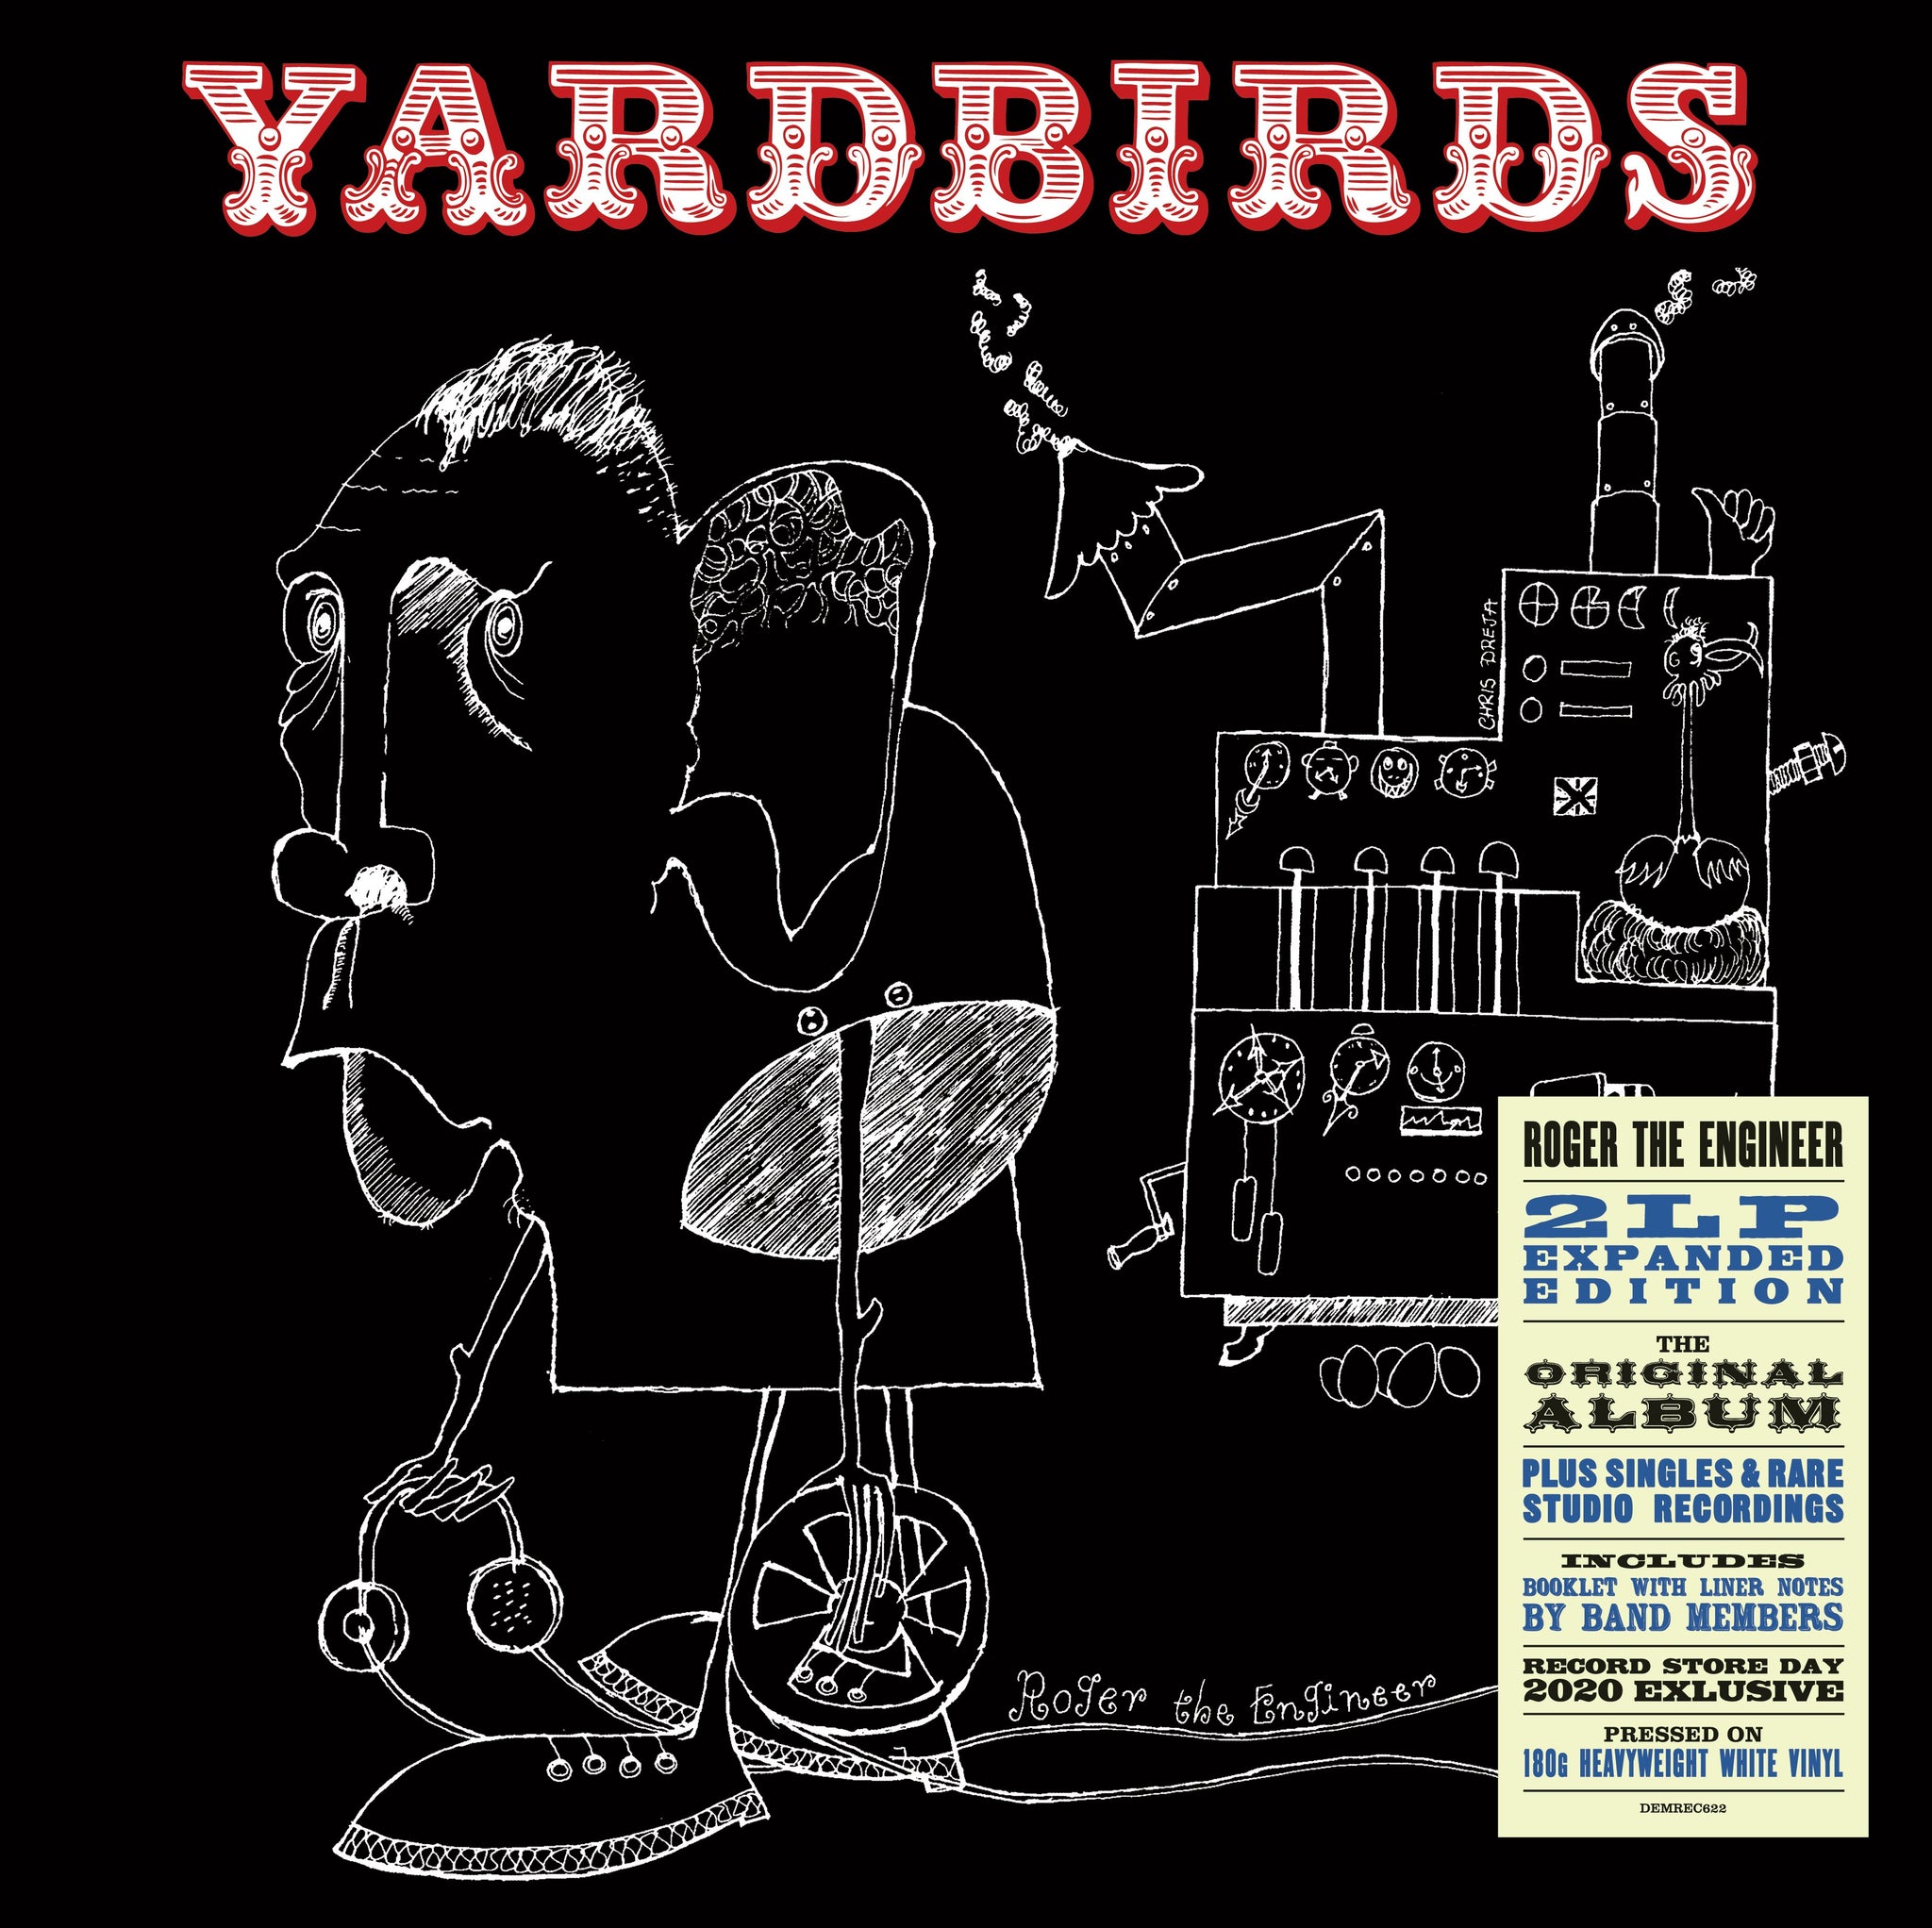 The Yardbirds Roger The Engineer A A A œ Expanded Edition Wax And Beans